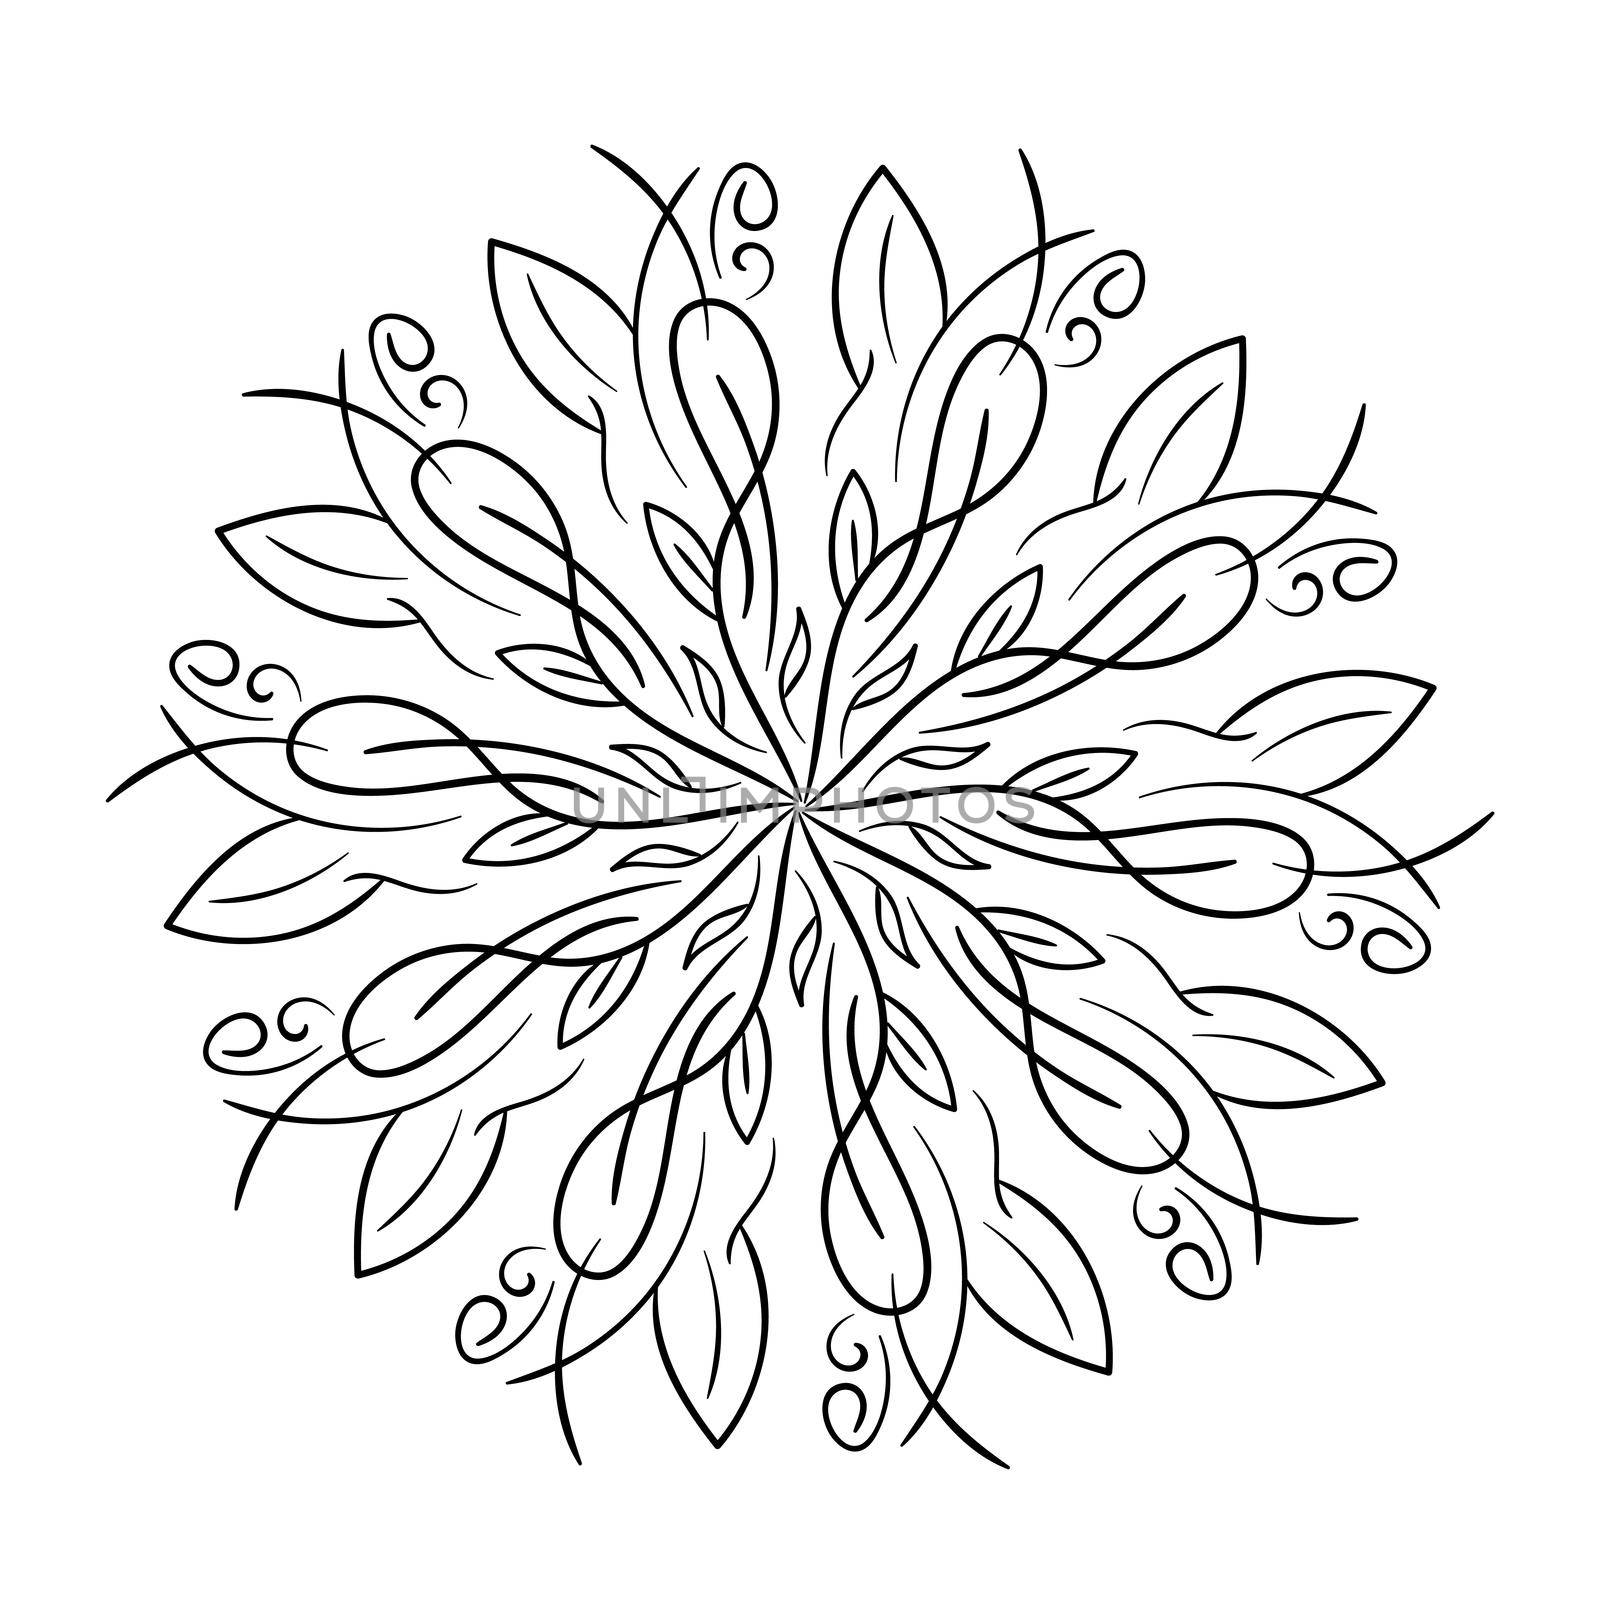 Floral mandala with leaves and hearts on a white background. by natali_brill